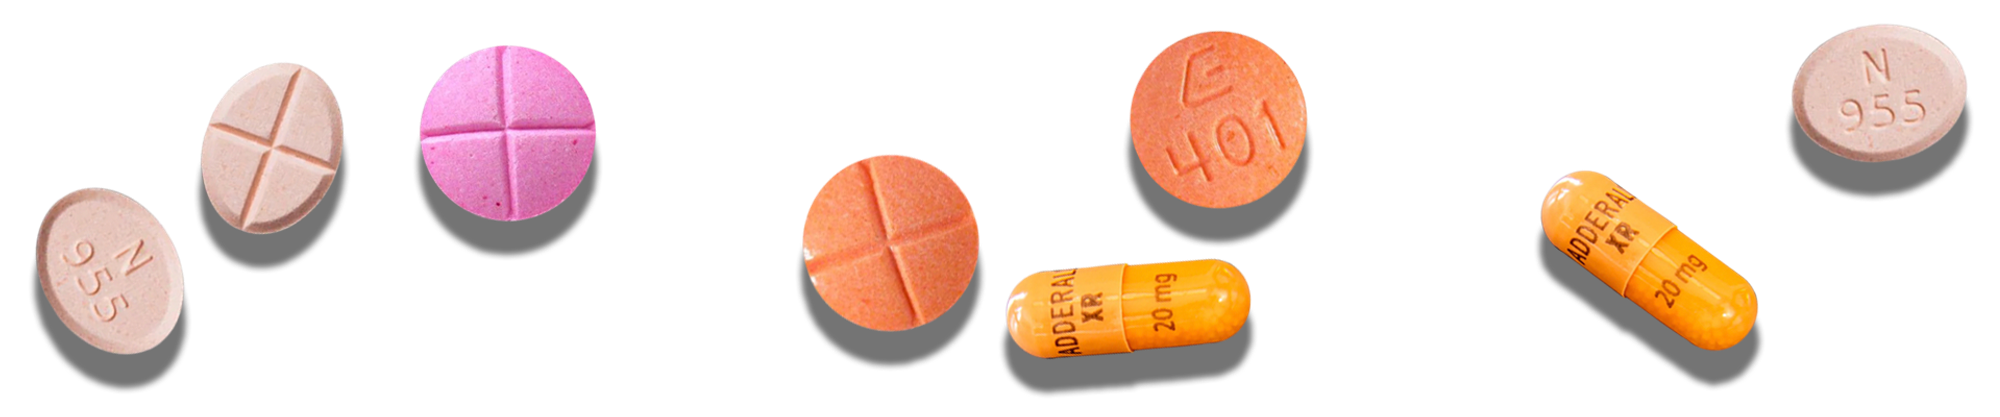 Adderall pills of different shapes, sizes, and colors arranged in a line.